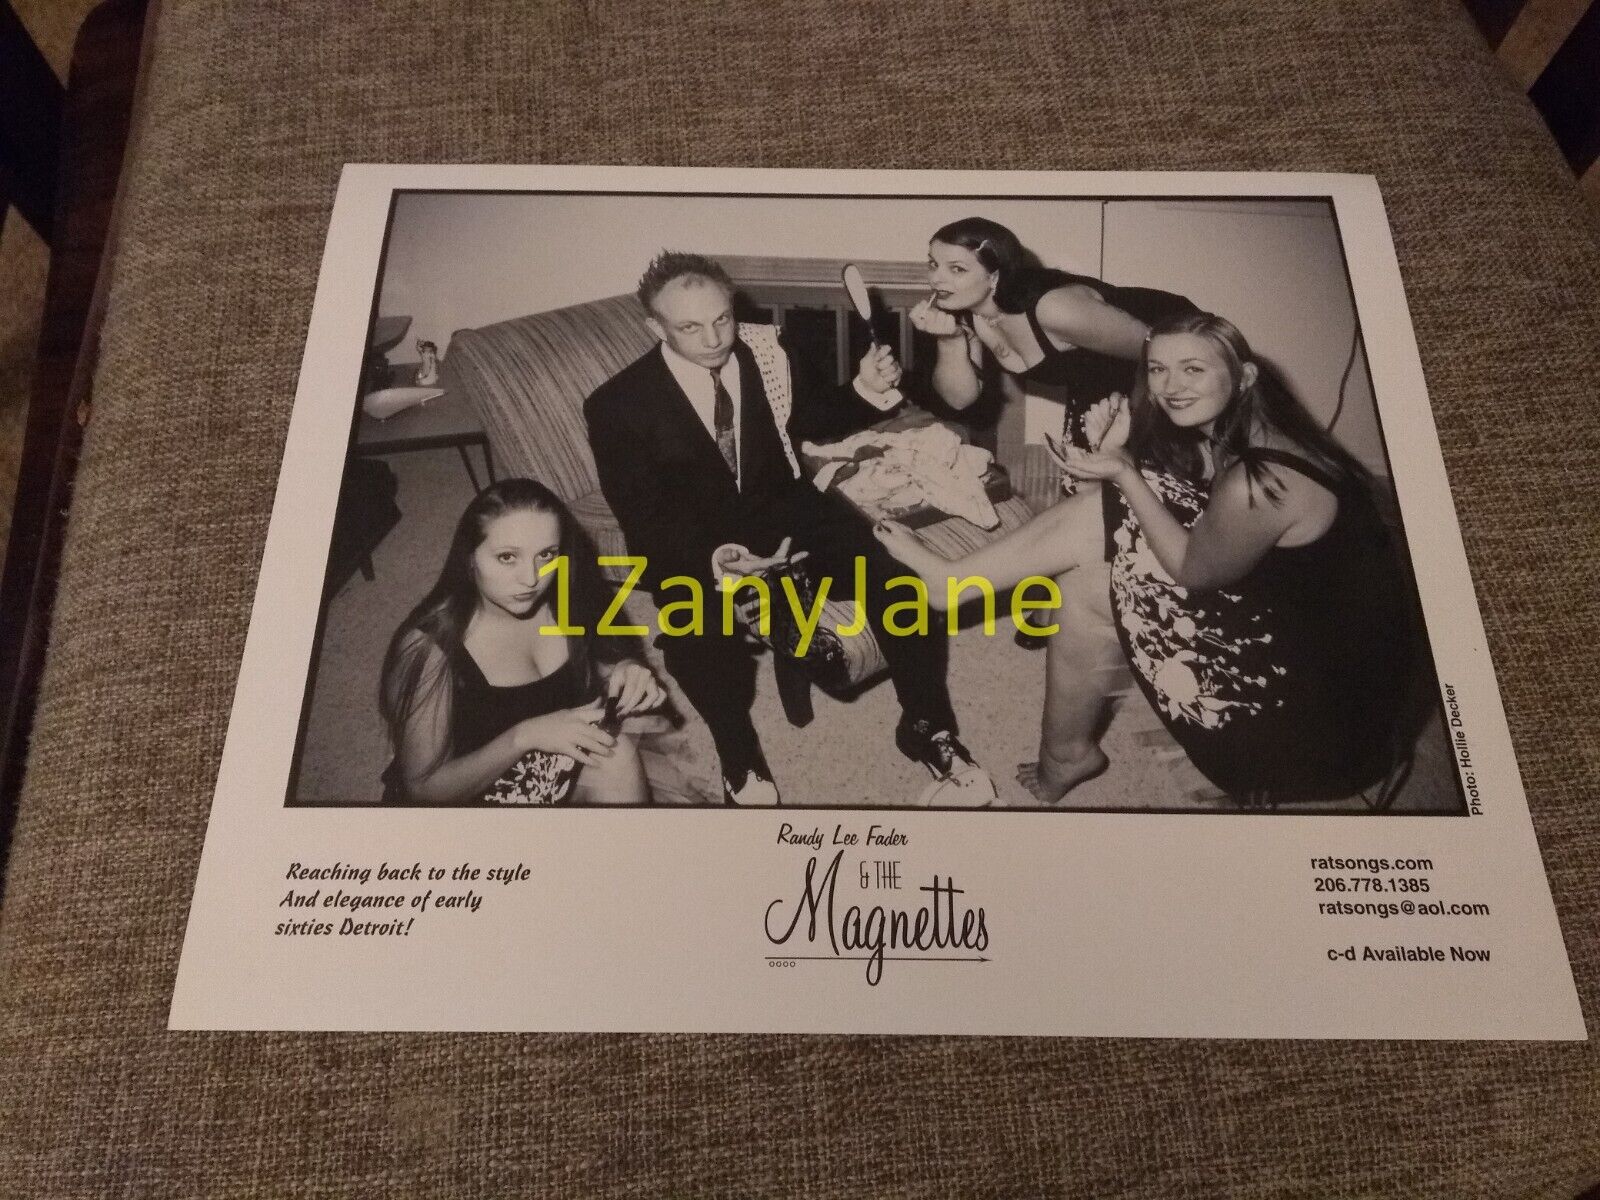 P486 Band 8x10 Press Photo PROMO MEDIA RANDY LEE FADER & THE MAGNETTES